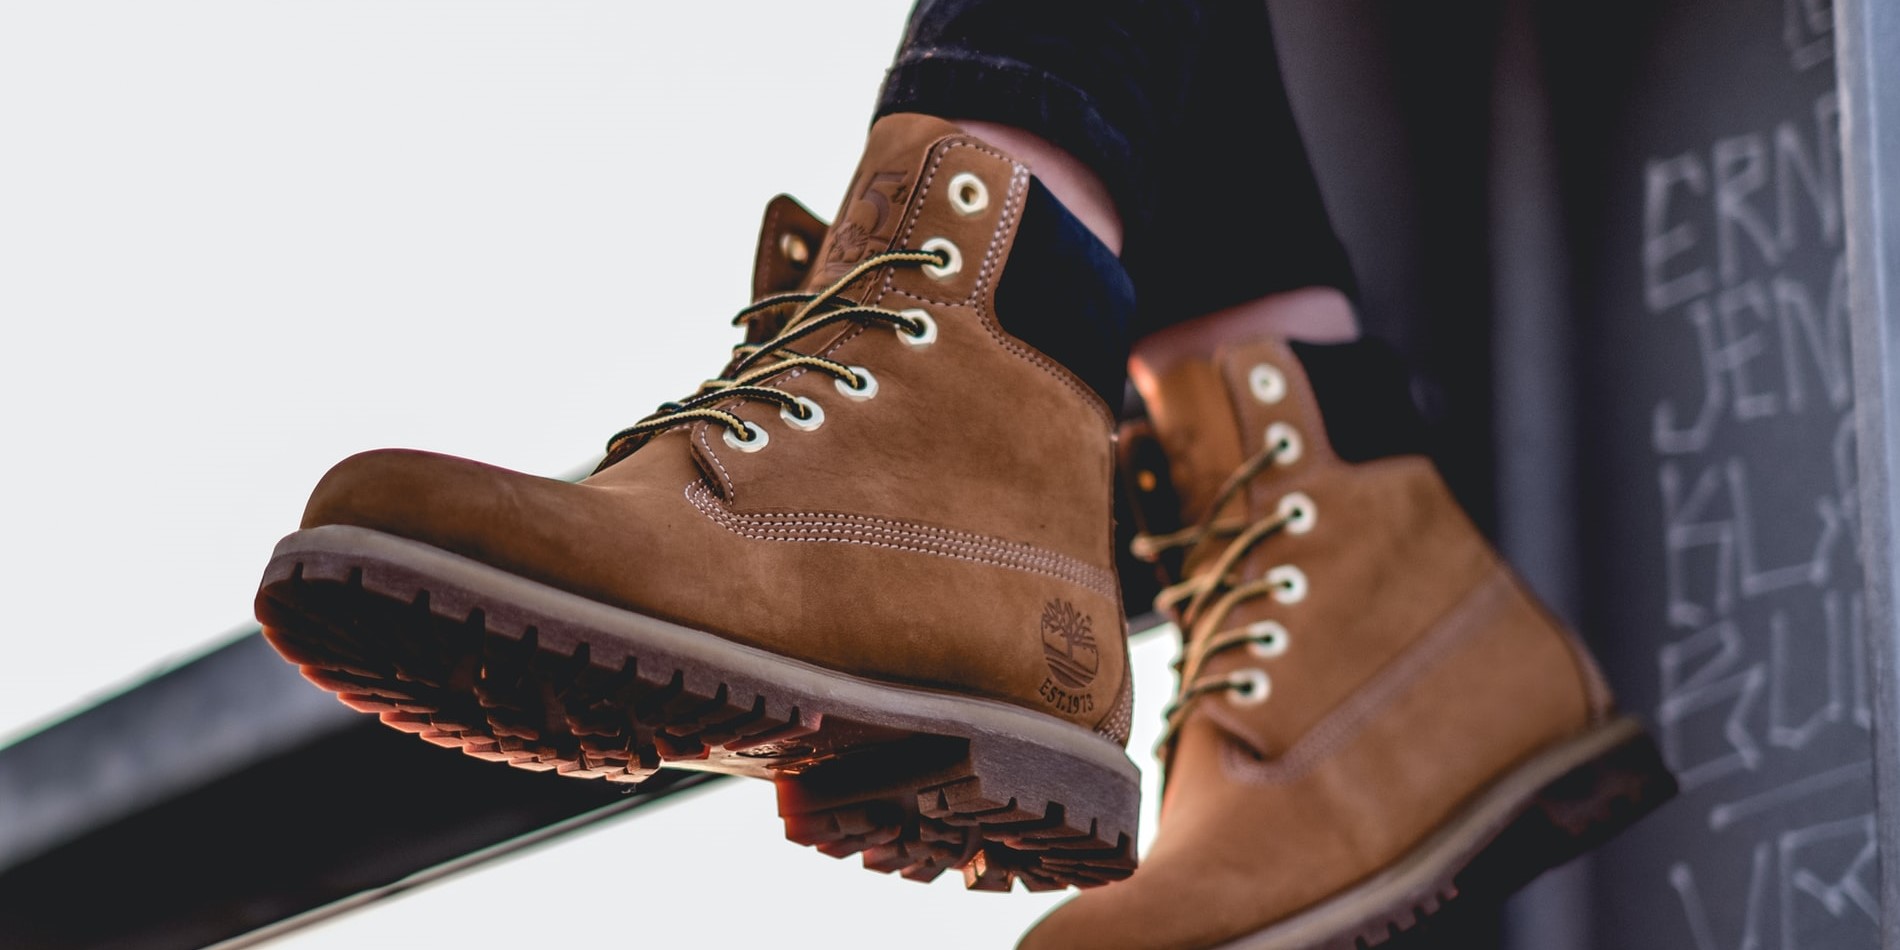 How can Timberland turn their Facebook likes into revenue?